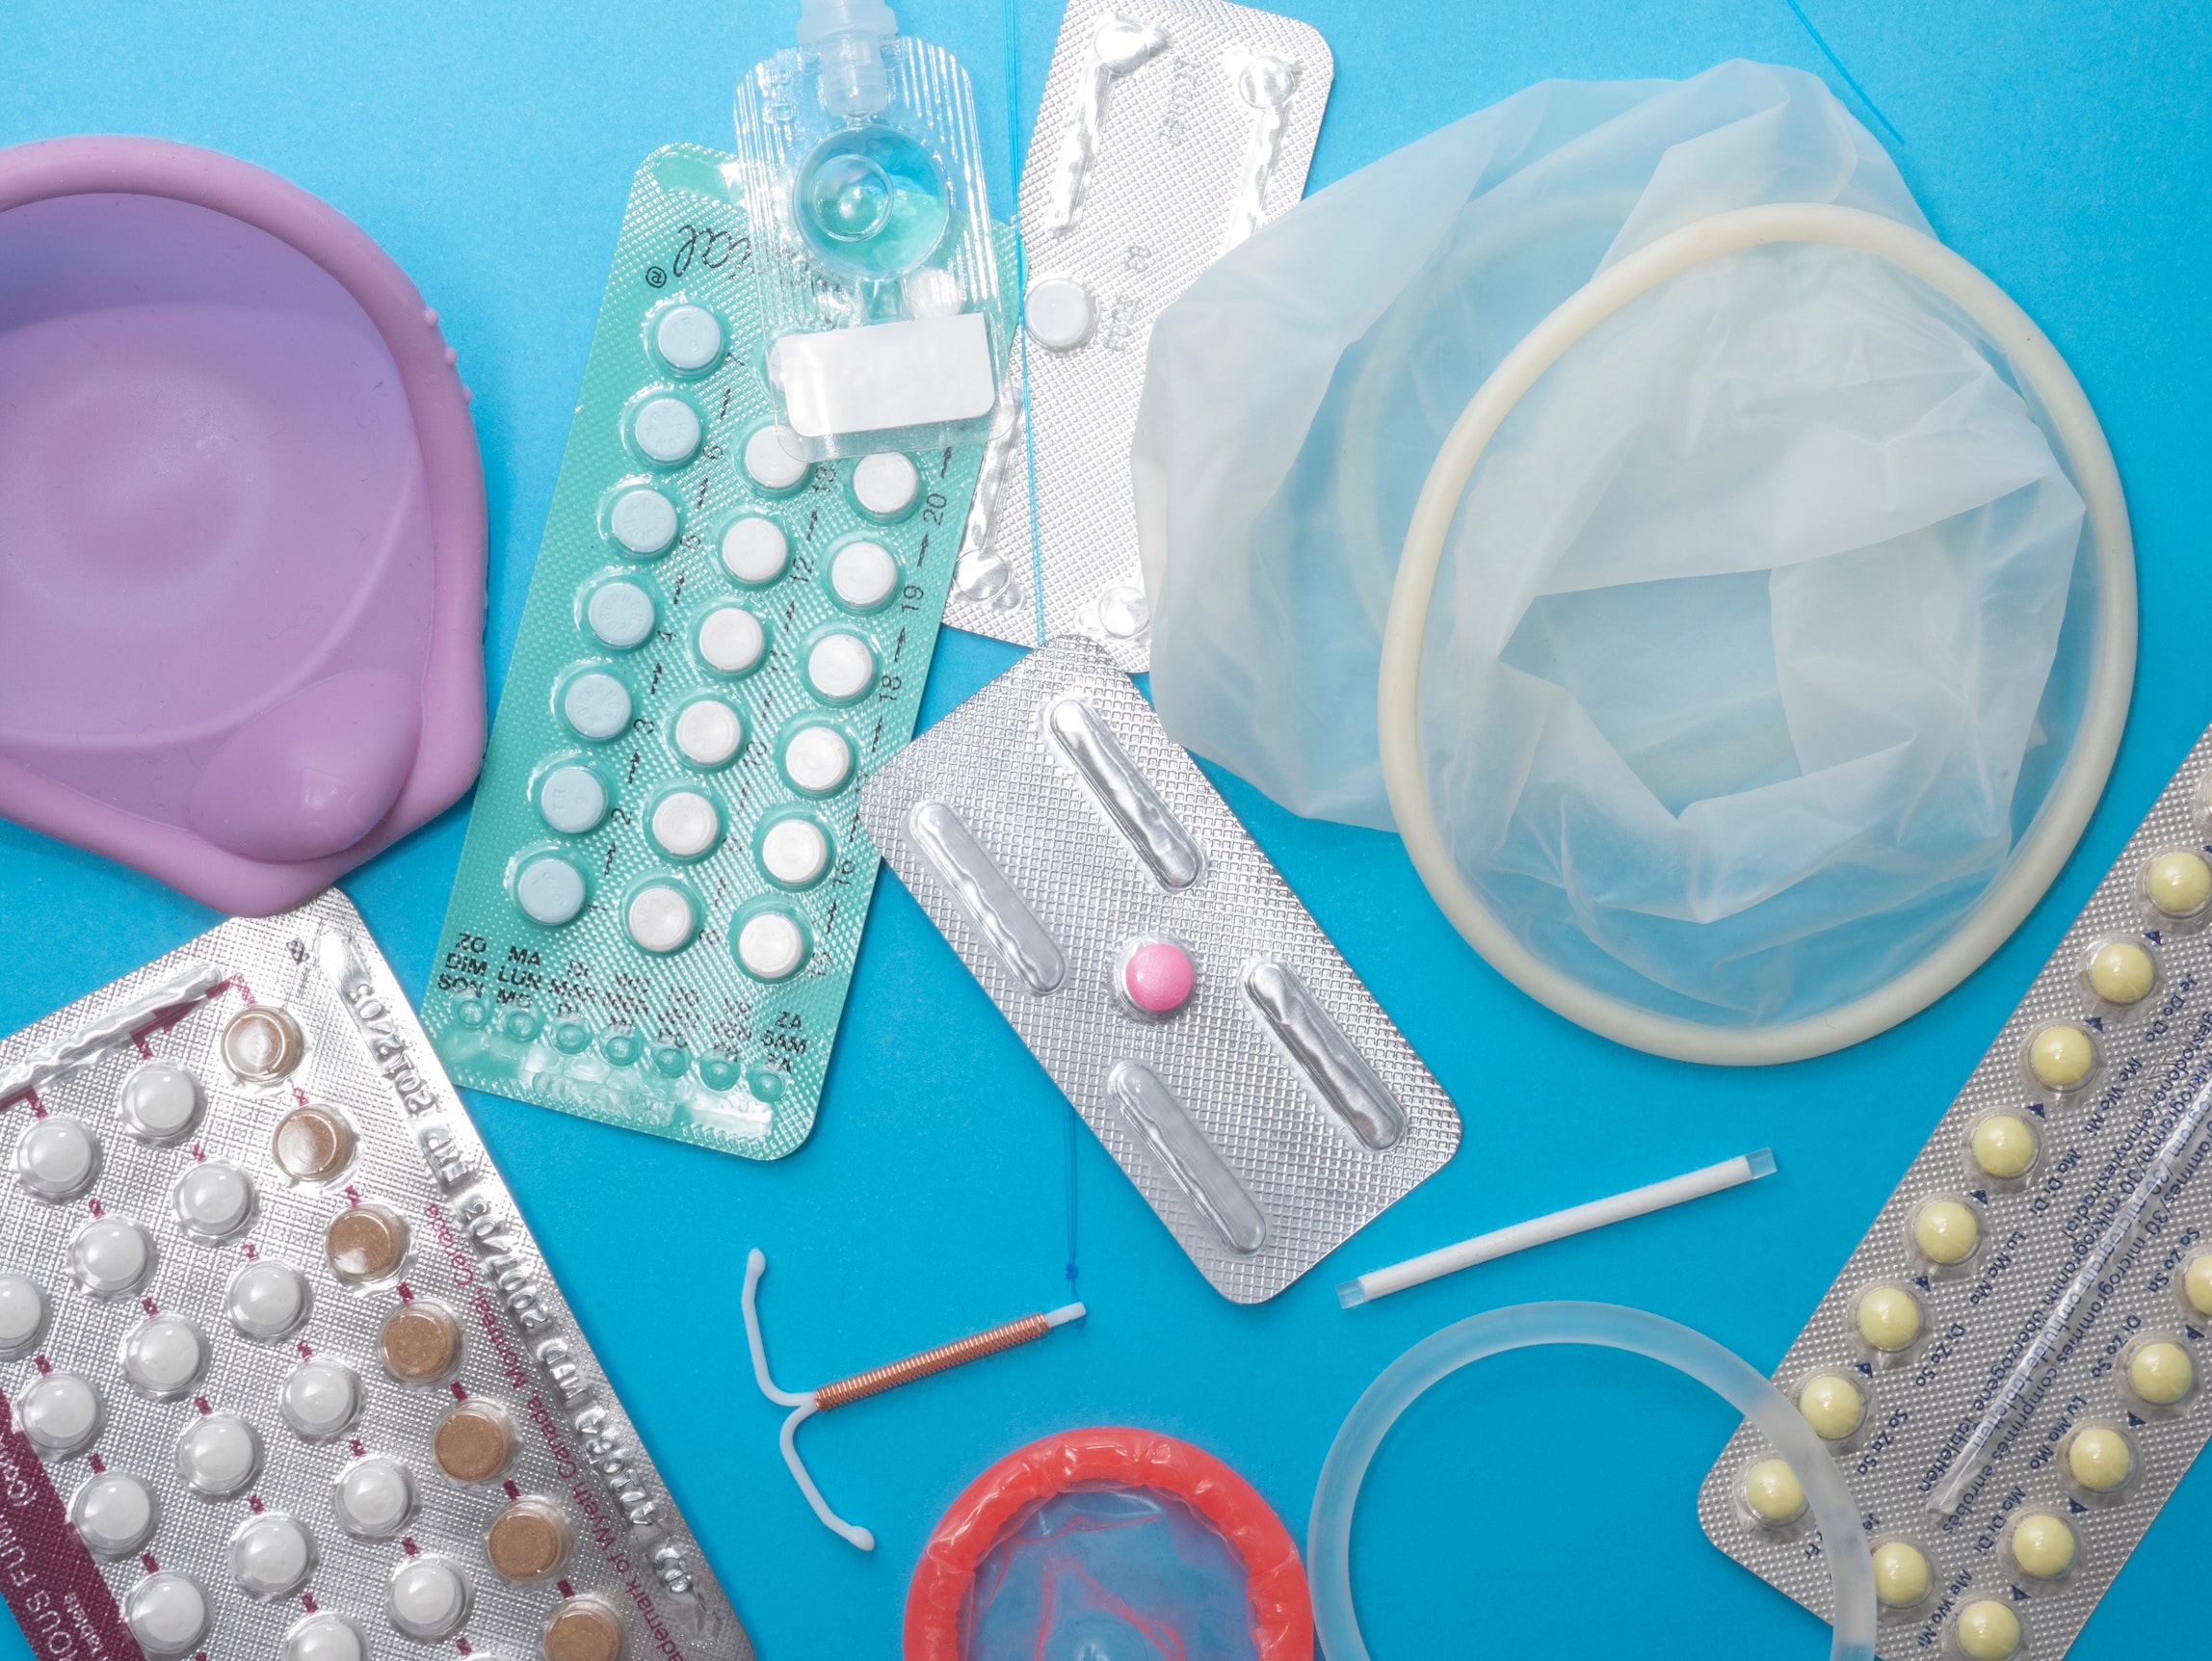 The contraceptive supply chain in India has been severely disrupted by the COVID-19 pandemic. Millions of commodities, deemed non-essential goods, were unable to reach clients in need of them. Photo: Reproductive Health Supplies Coalition (via Unsplash)